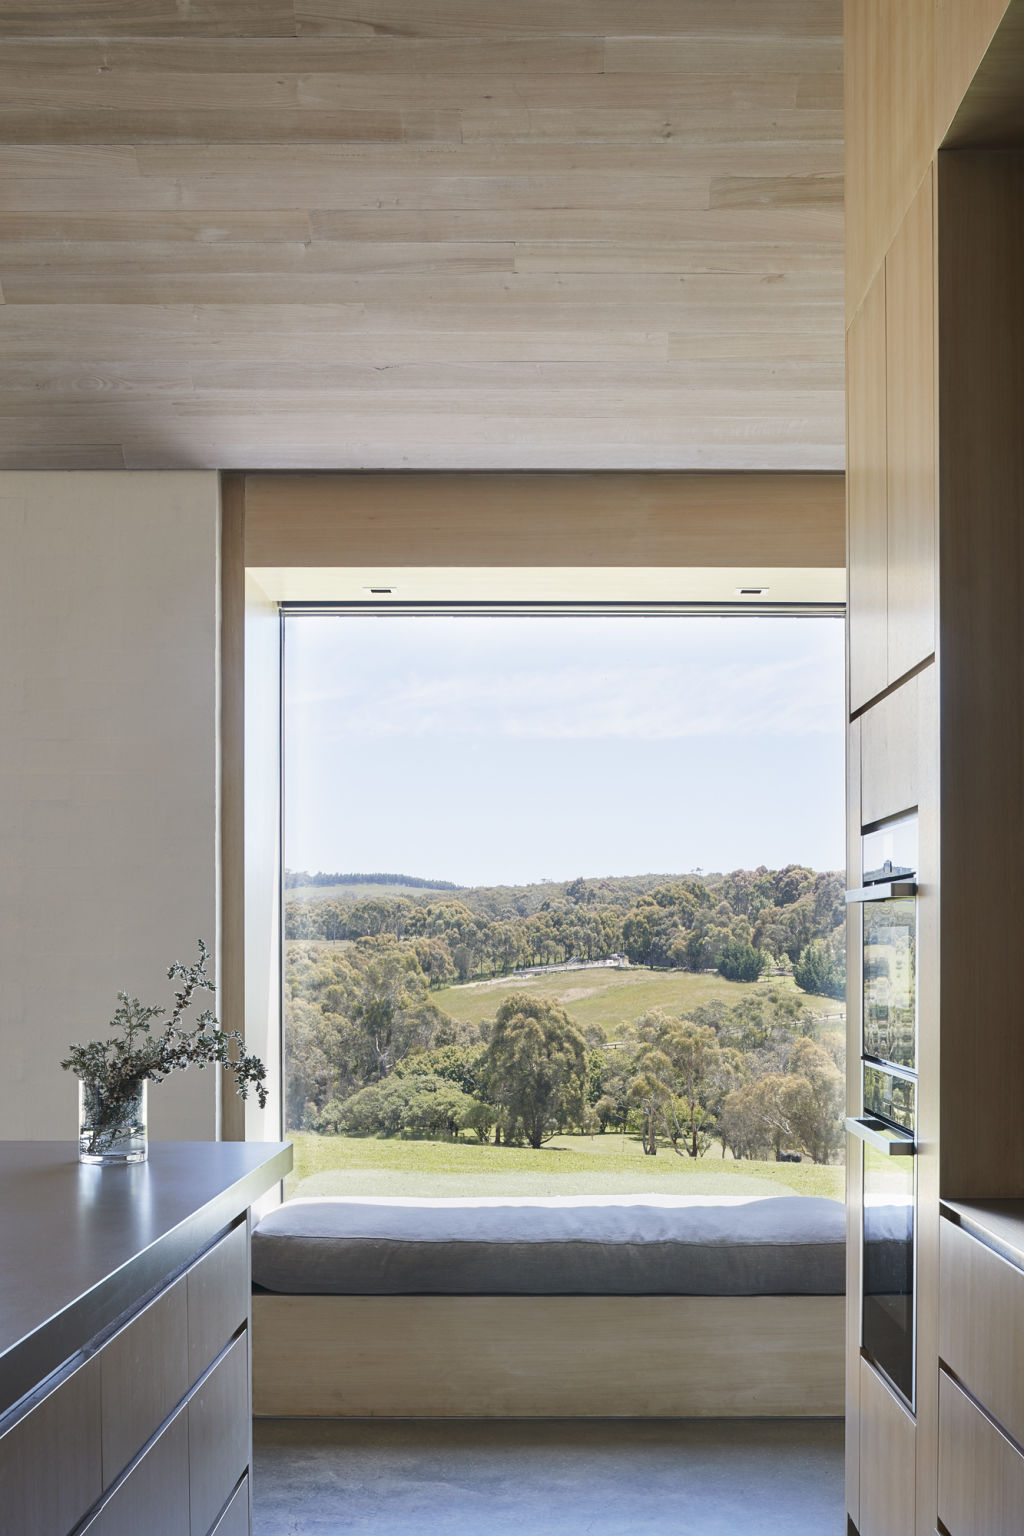 A settle-in window seat overlooking a superb valley view. Photo: Shannon McGrath